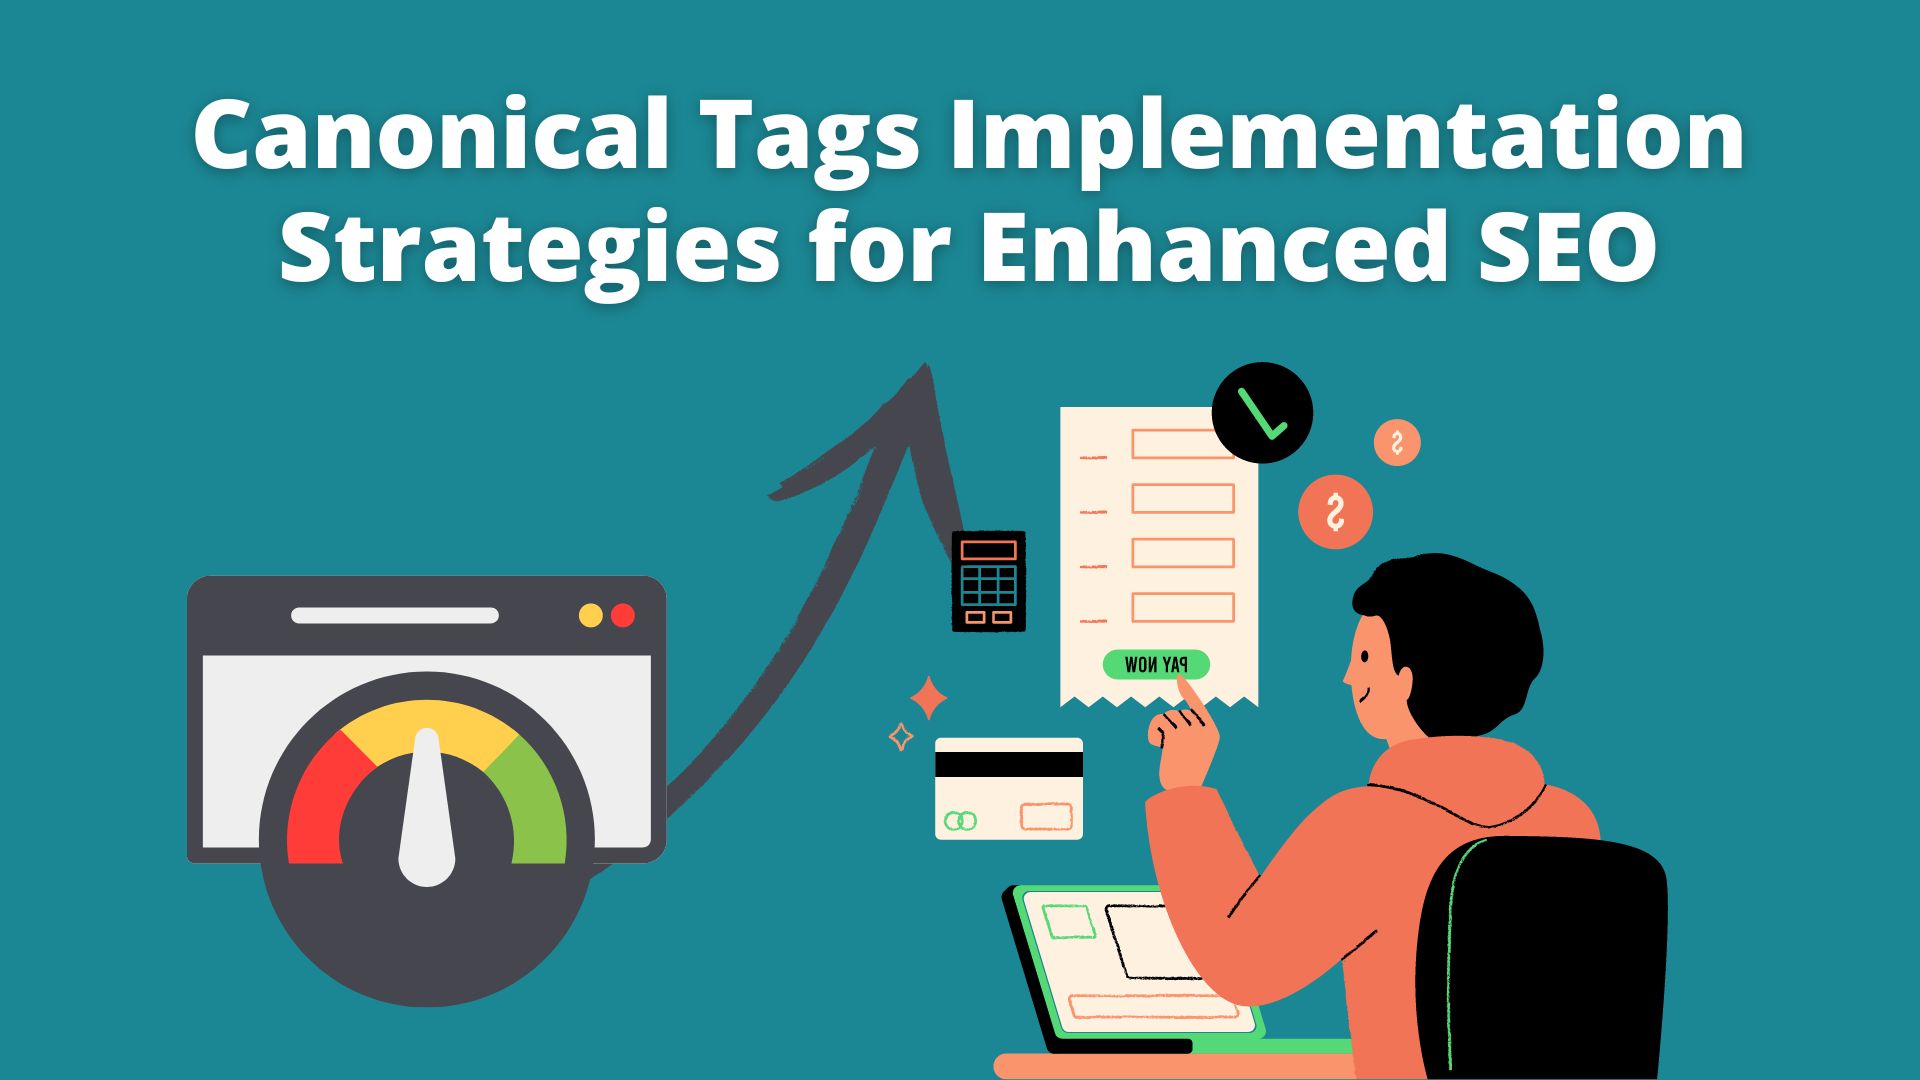 Canonical Tags Implementation Strategies for Enhanced SEO